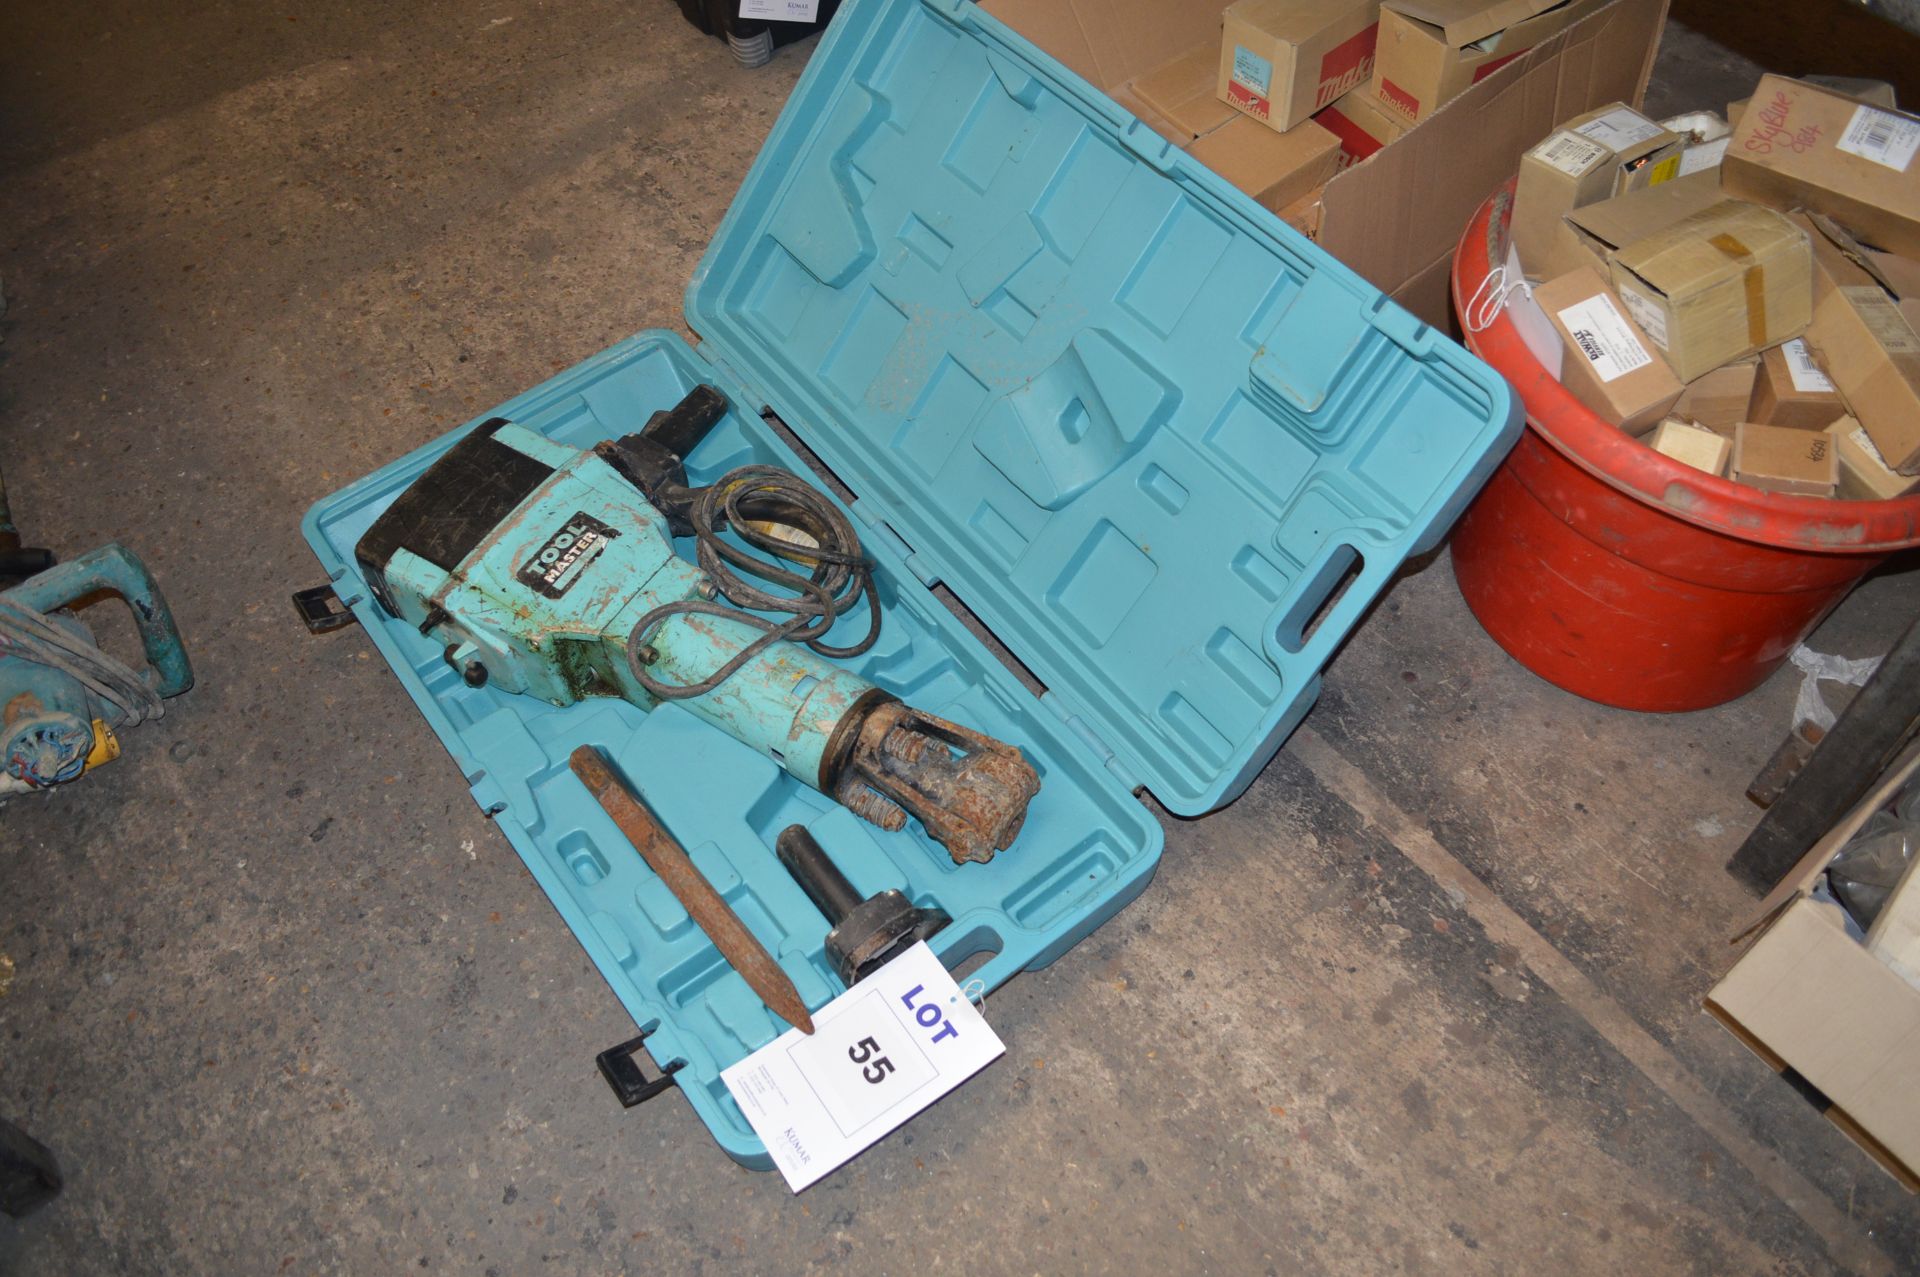 Tool Master Pro 110v Breaker with 
Mobile Carry Case 
located at Spa Gates Ltd, Blick Road,